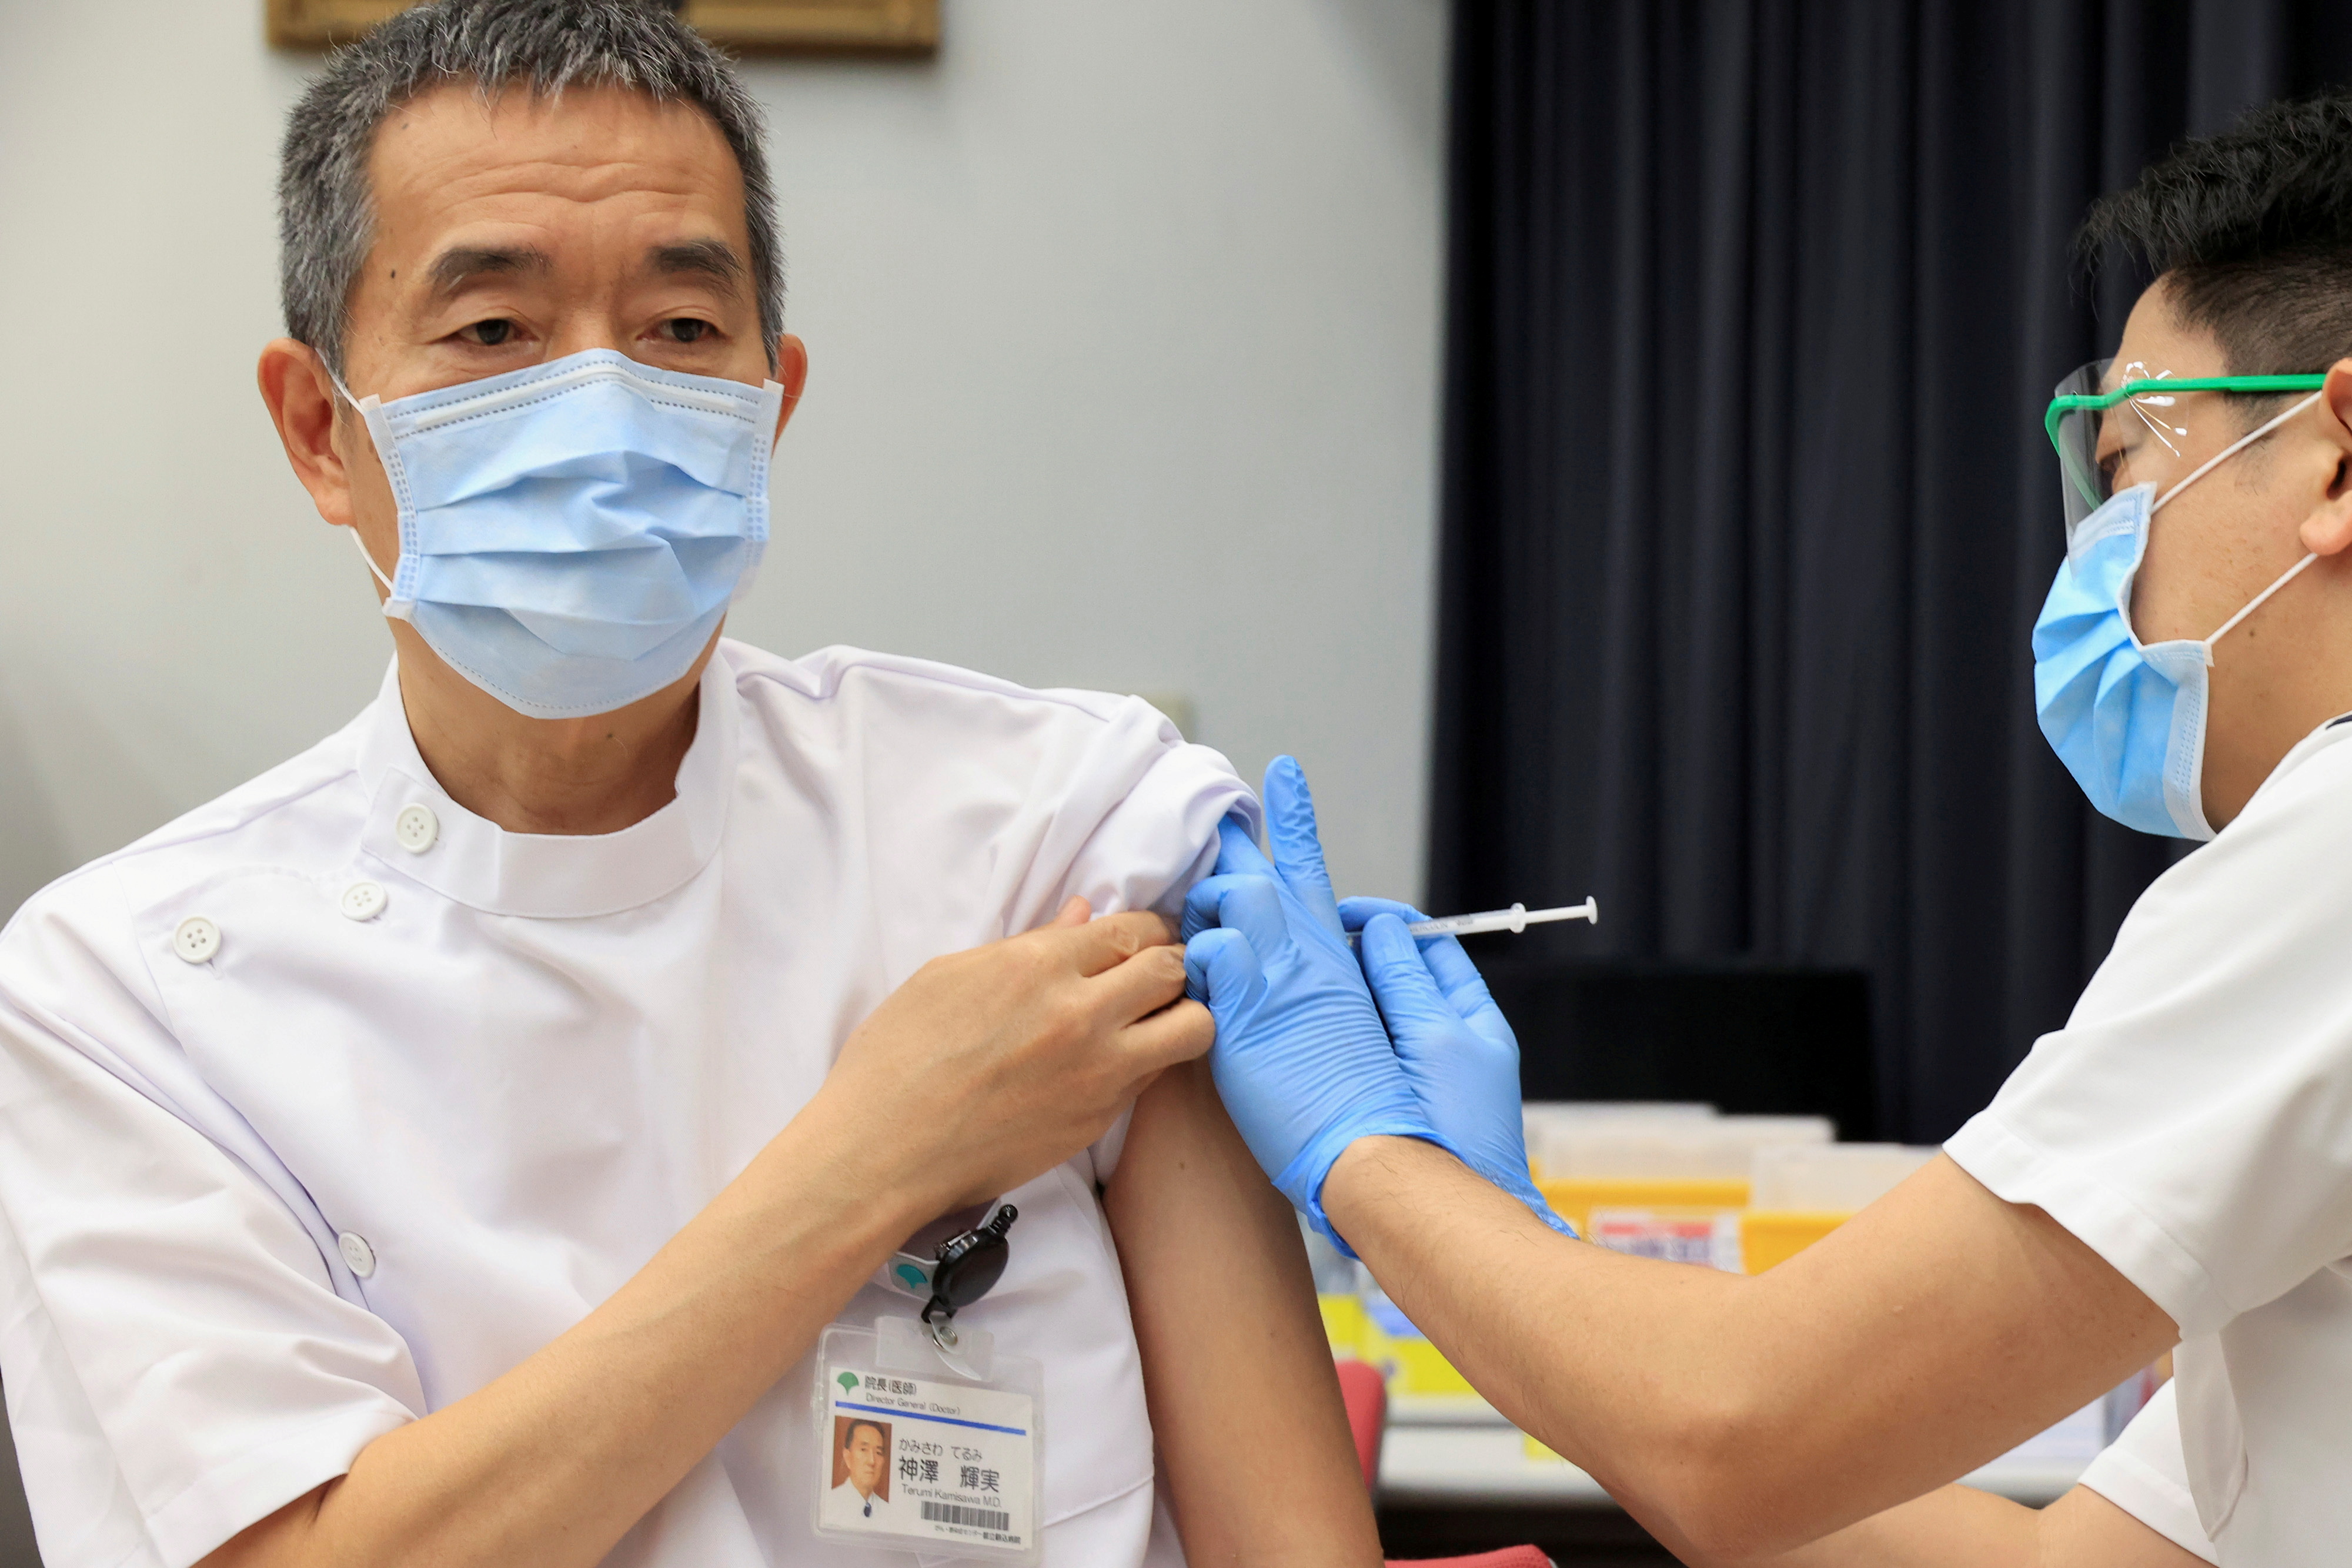 Medical workers receive doses of the vaccine against the coronavirus disease (COVID-19) at the Tokyo Metropolitan Cancer and Infectious Diseases Center Komagome Hospital in Tokyo